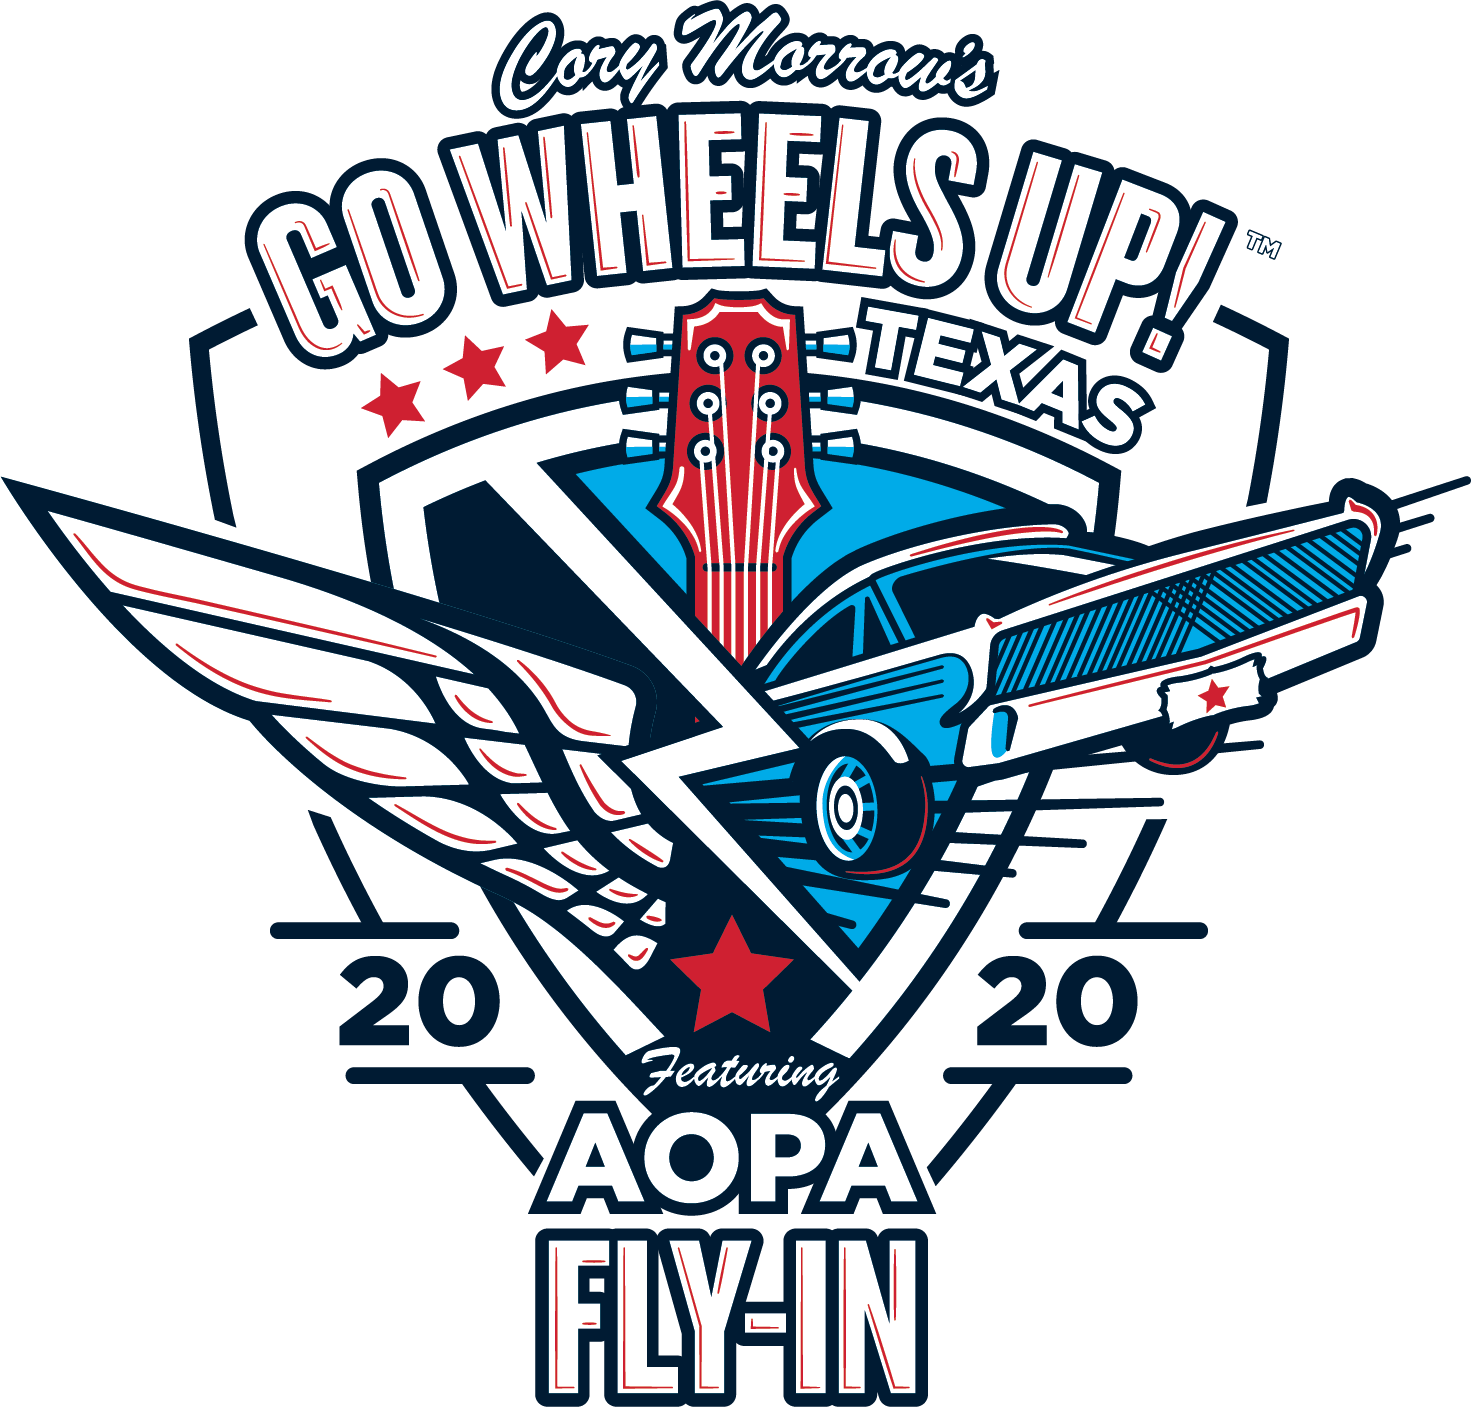 Cory Morrow's Go Wheels Up! Texas 2020 Featuring AOPA Fly-In